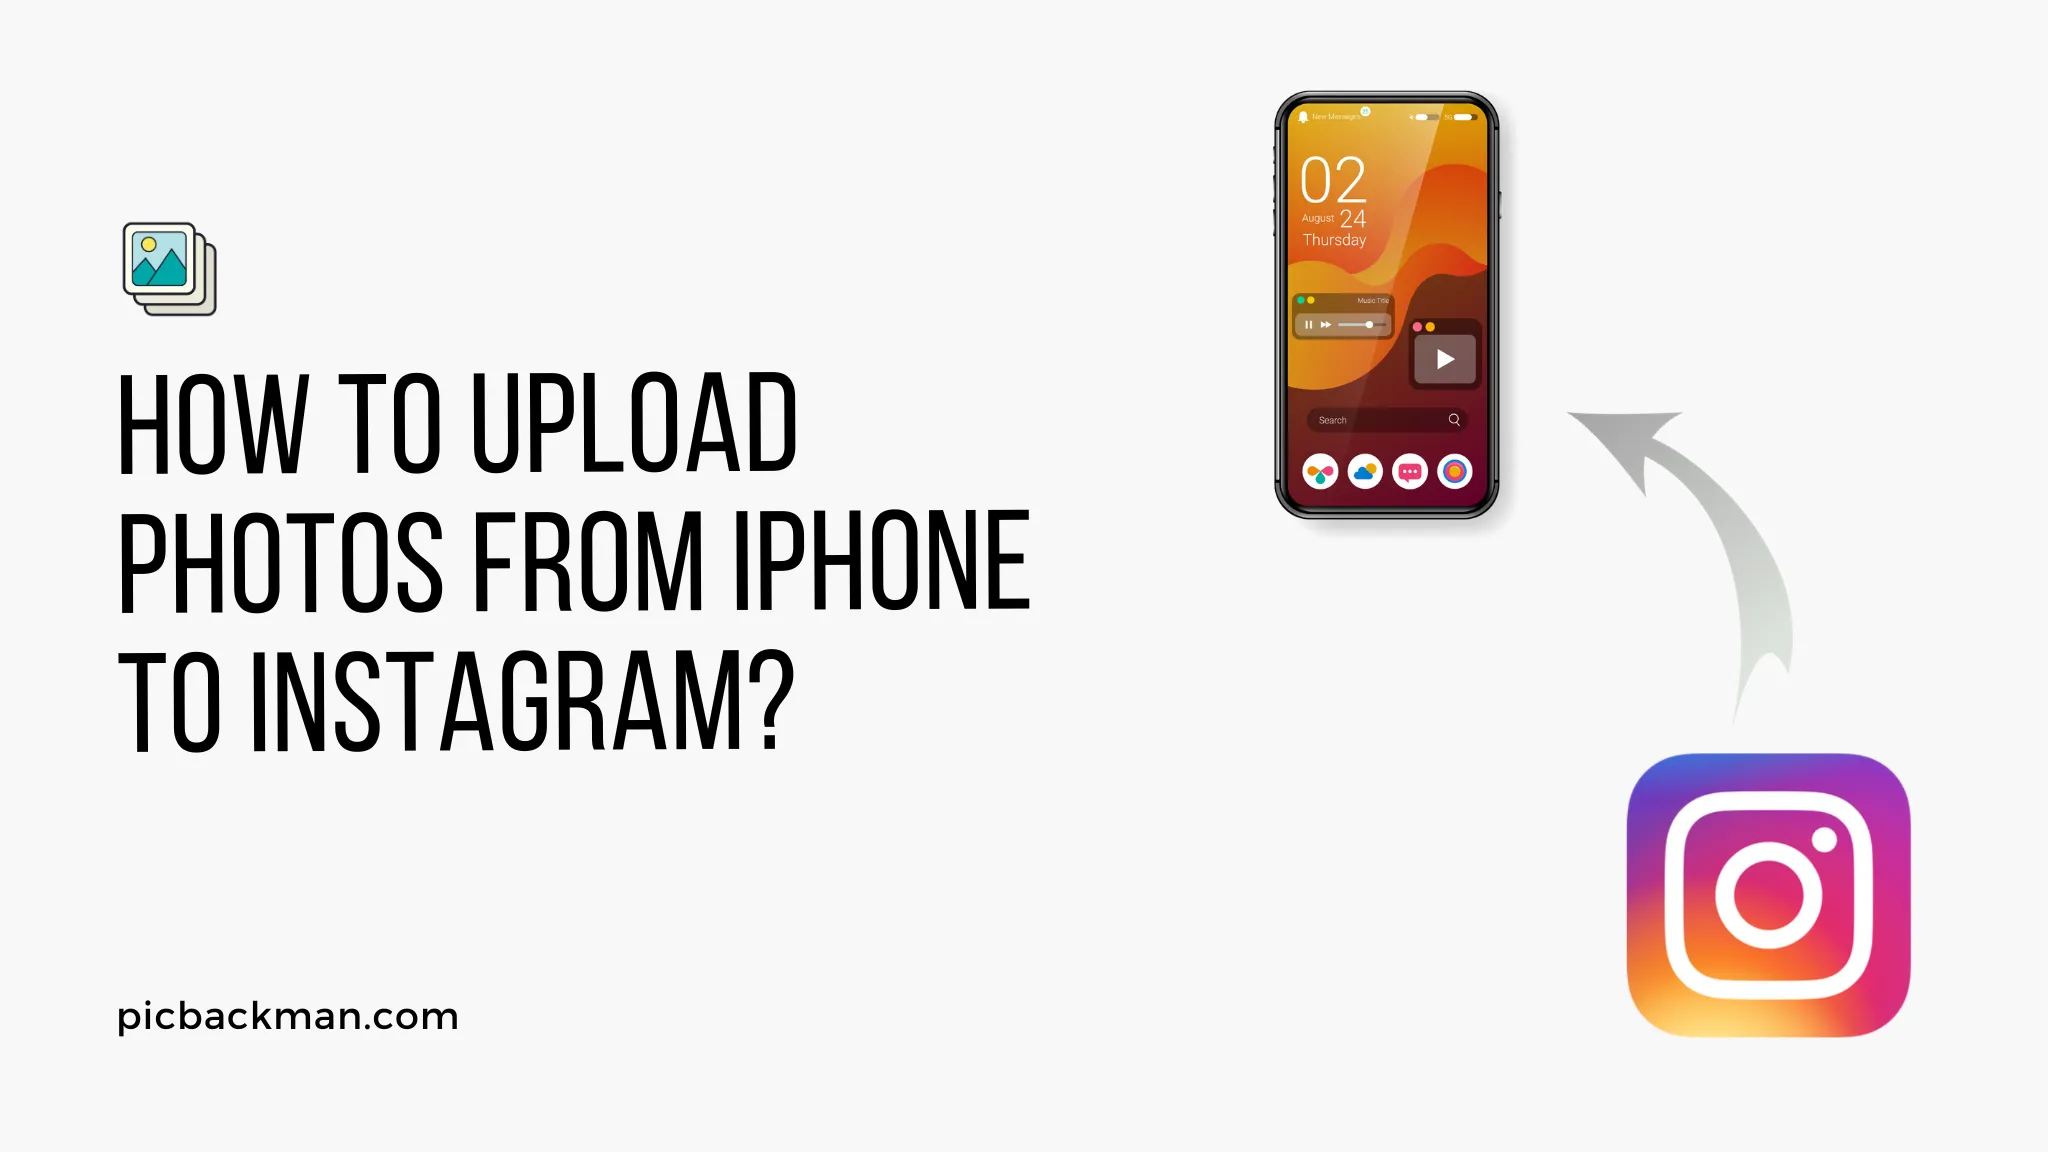 How to Upload Photos from iPhone to Instagram?